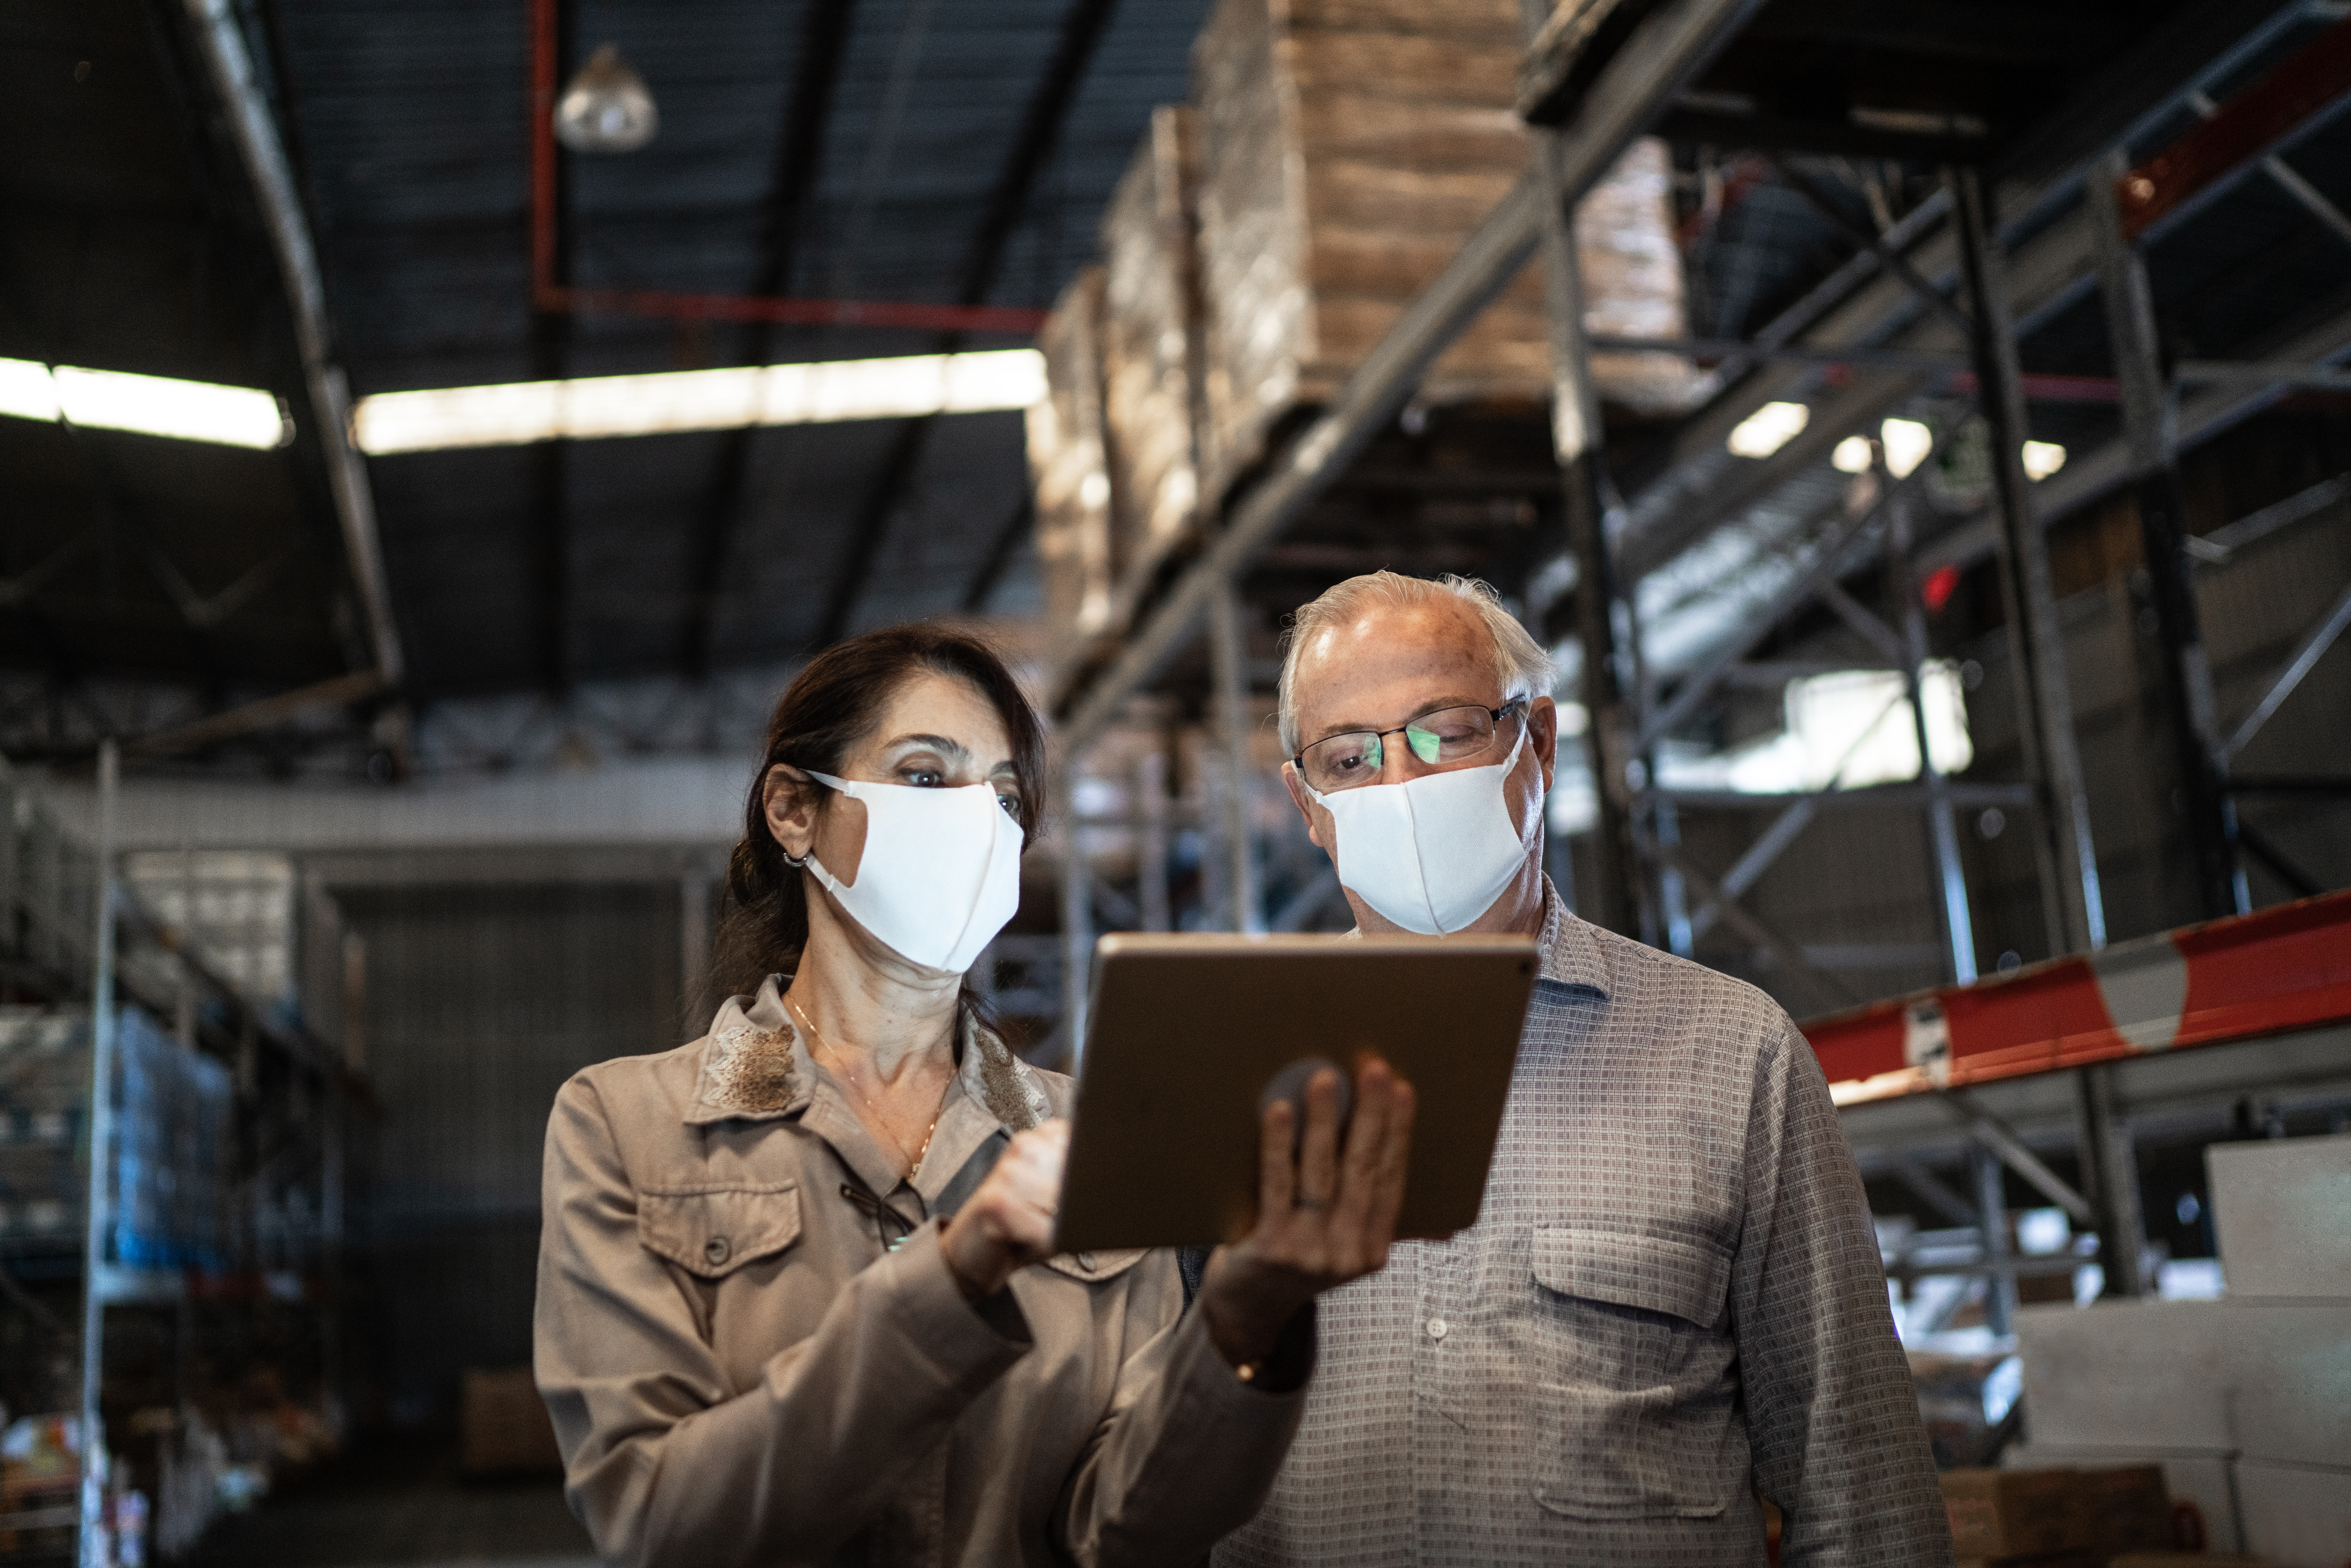 A man and woman in a warehouse reading a tablet